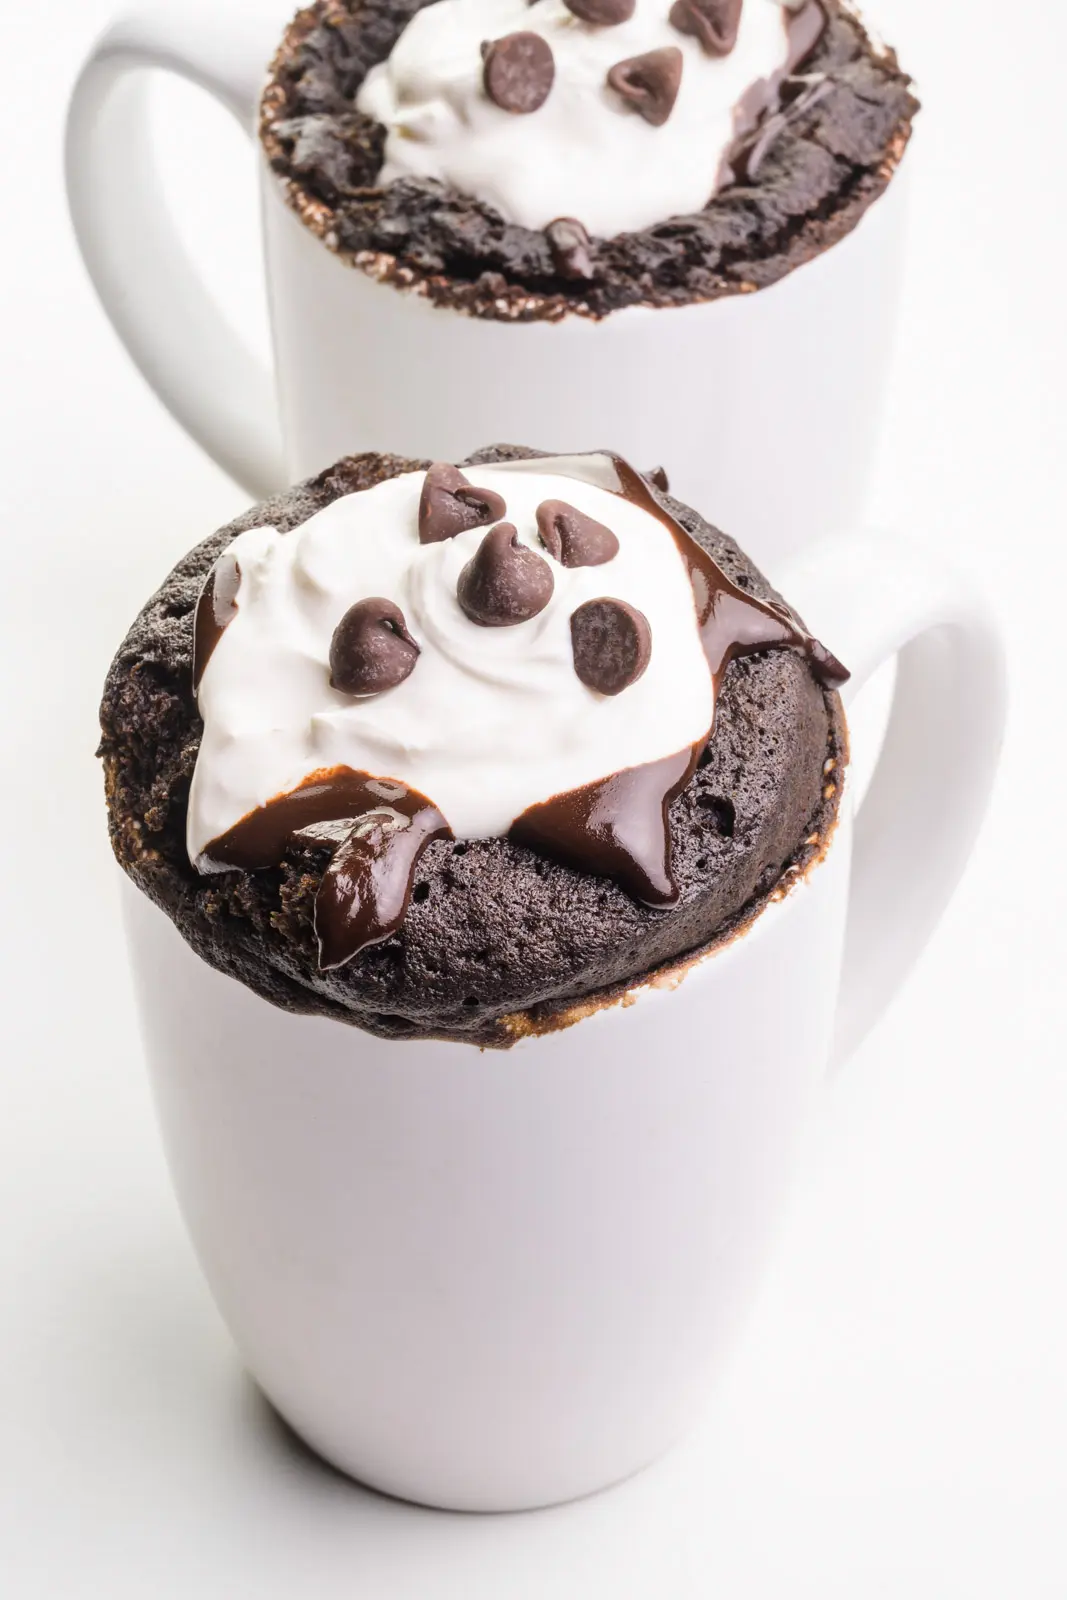 Two chocolate mug cakes have chocolate syrup, whipped cream, and chocolate chips on top.